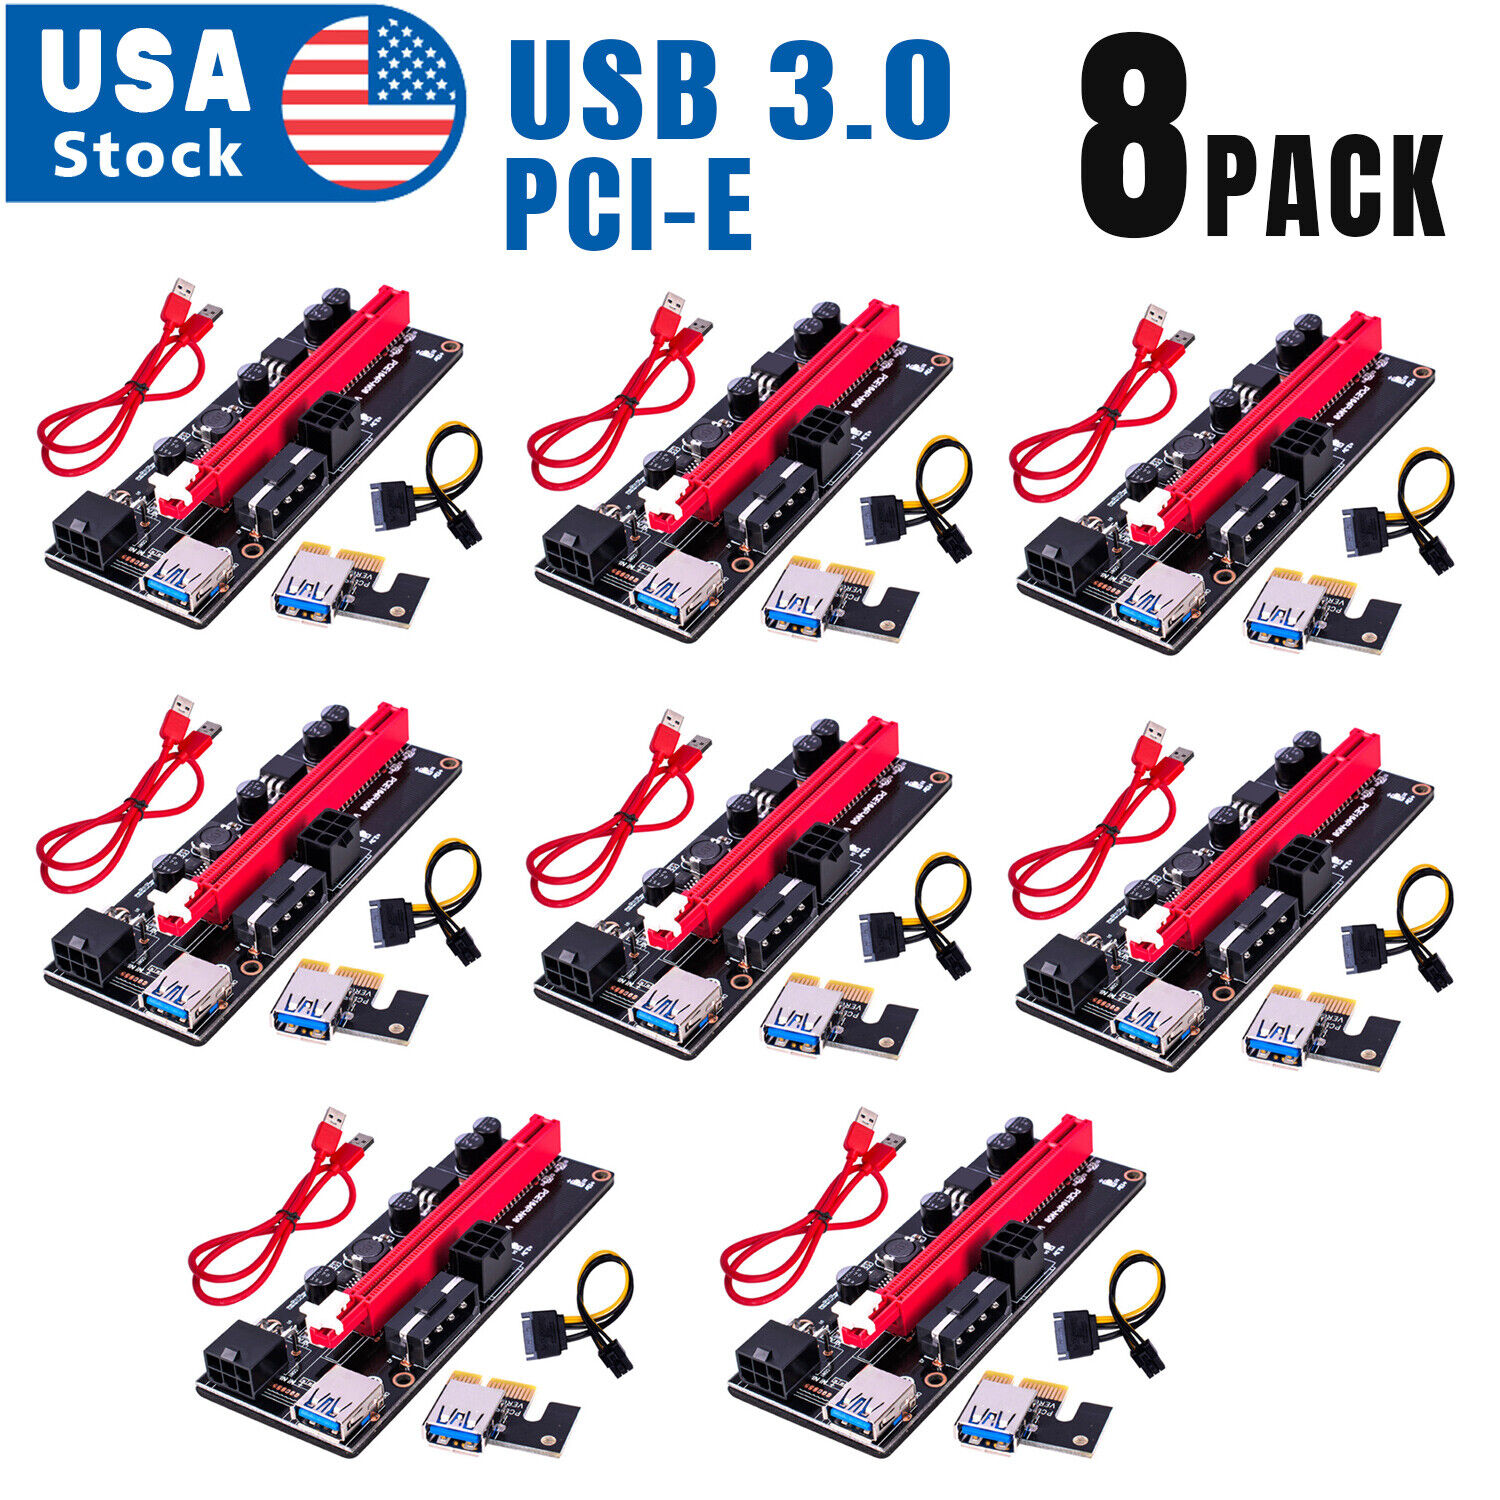 8PACK VER009S PCI-E Riser Card PCIe 1x to 16x USB 3.0 Data Cable Mining